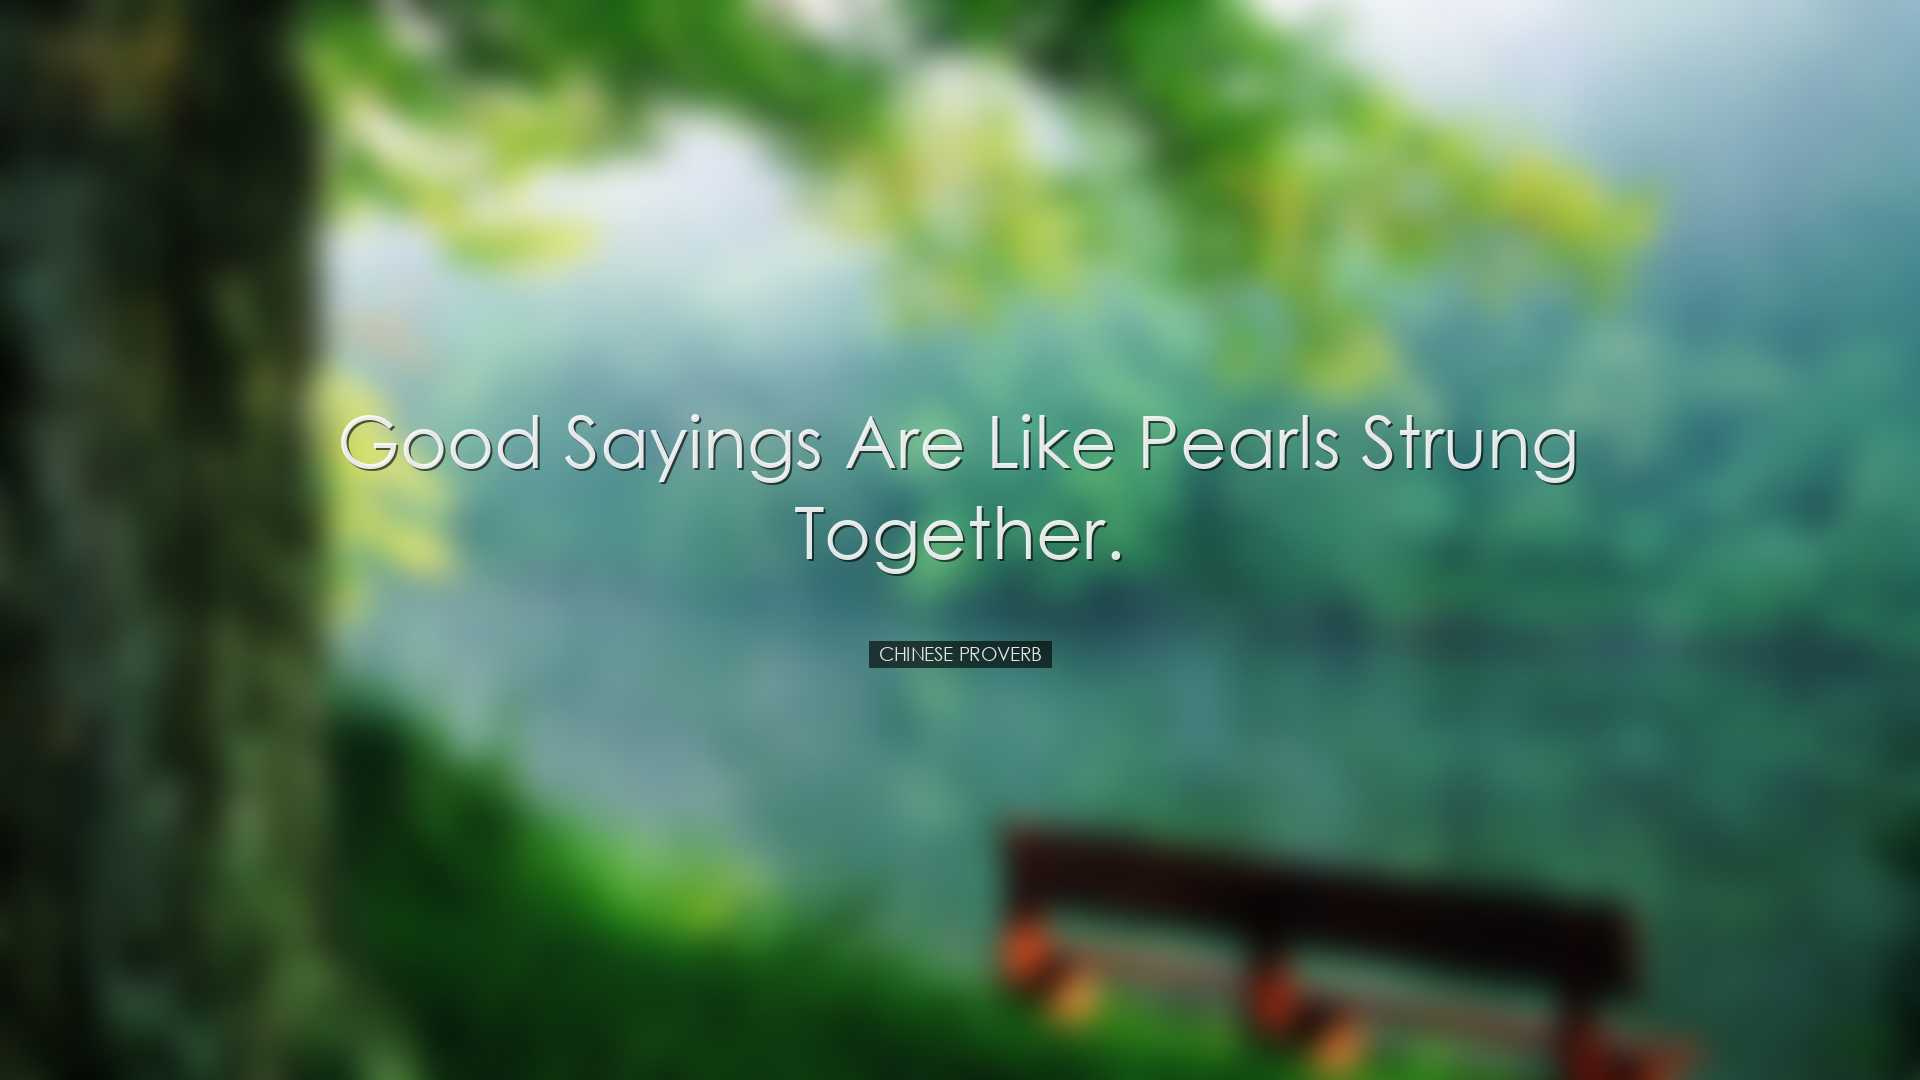 Good sayings are like pearls strung together. - Chinese Proverb